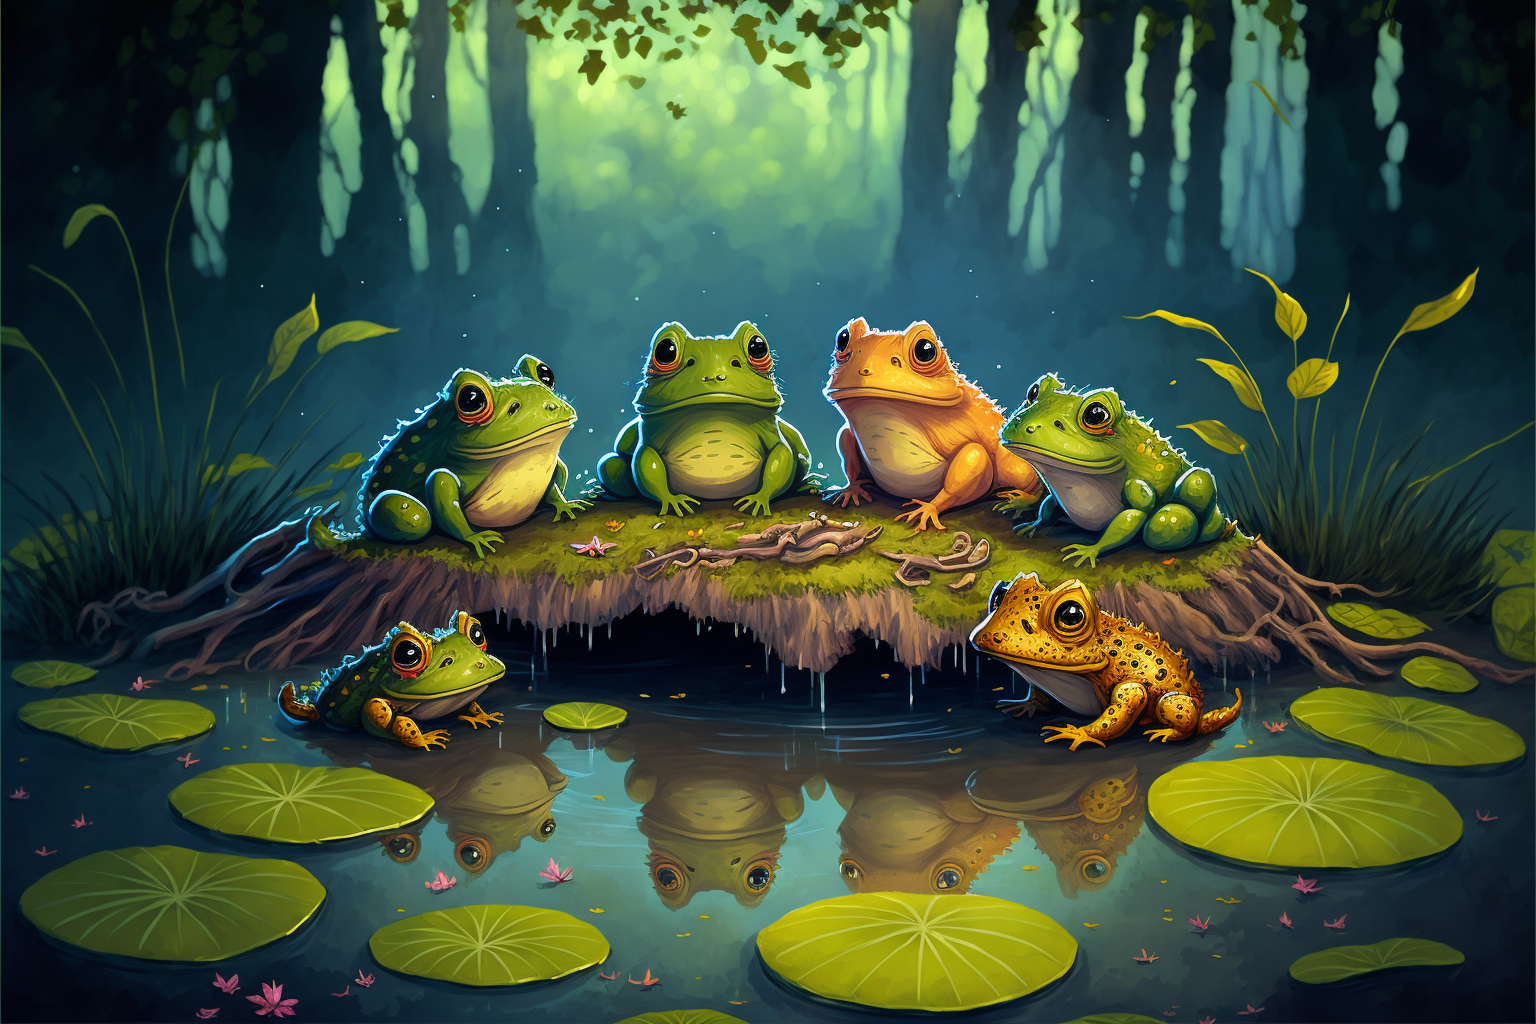 The Frogs Who Wished for a King